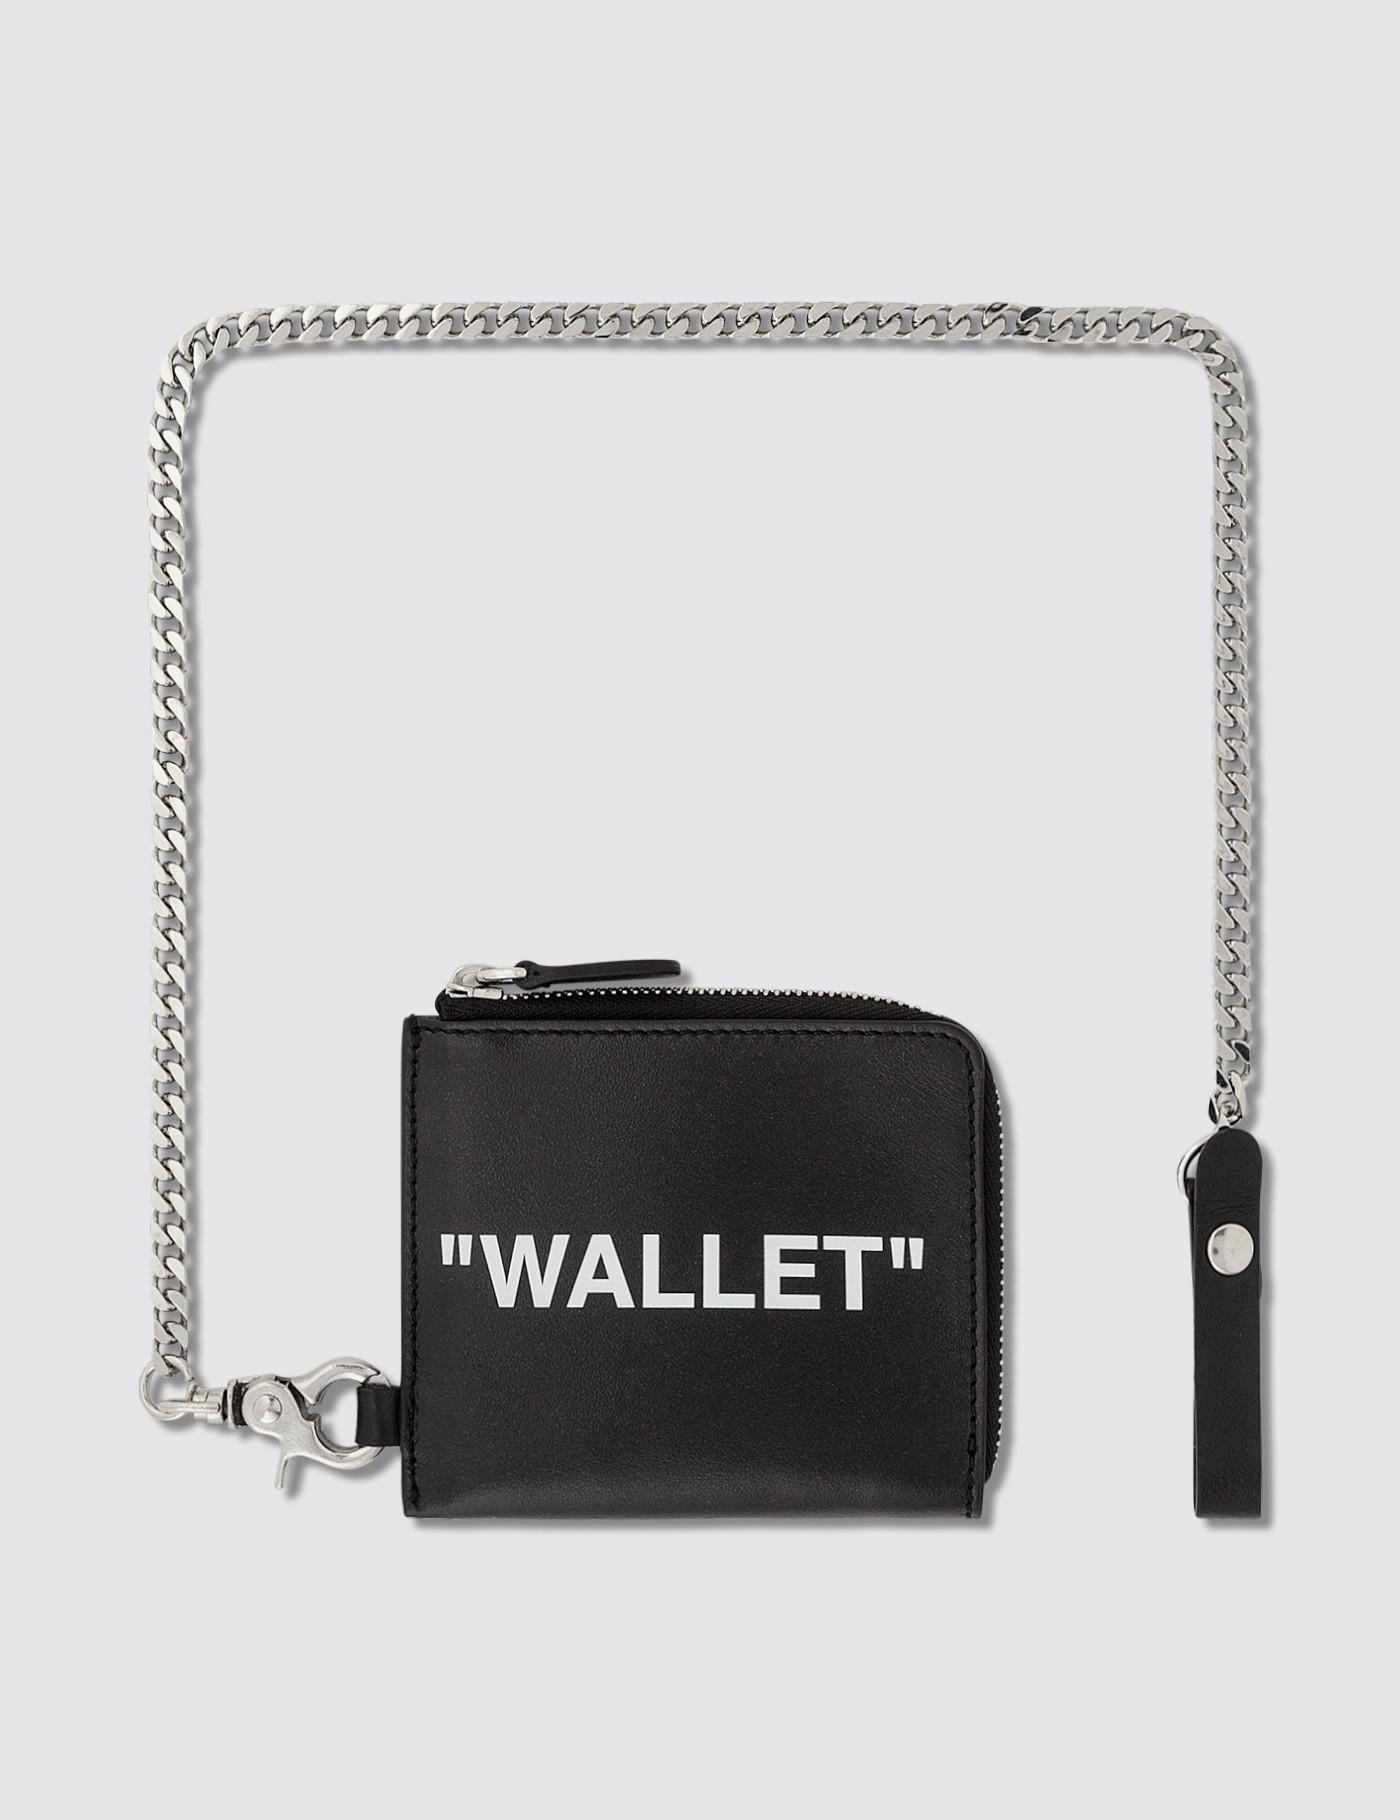 Off-White c/o Virgil Abloh Quote Chain Wallet in Black for Men - Lyst